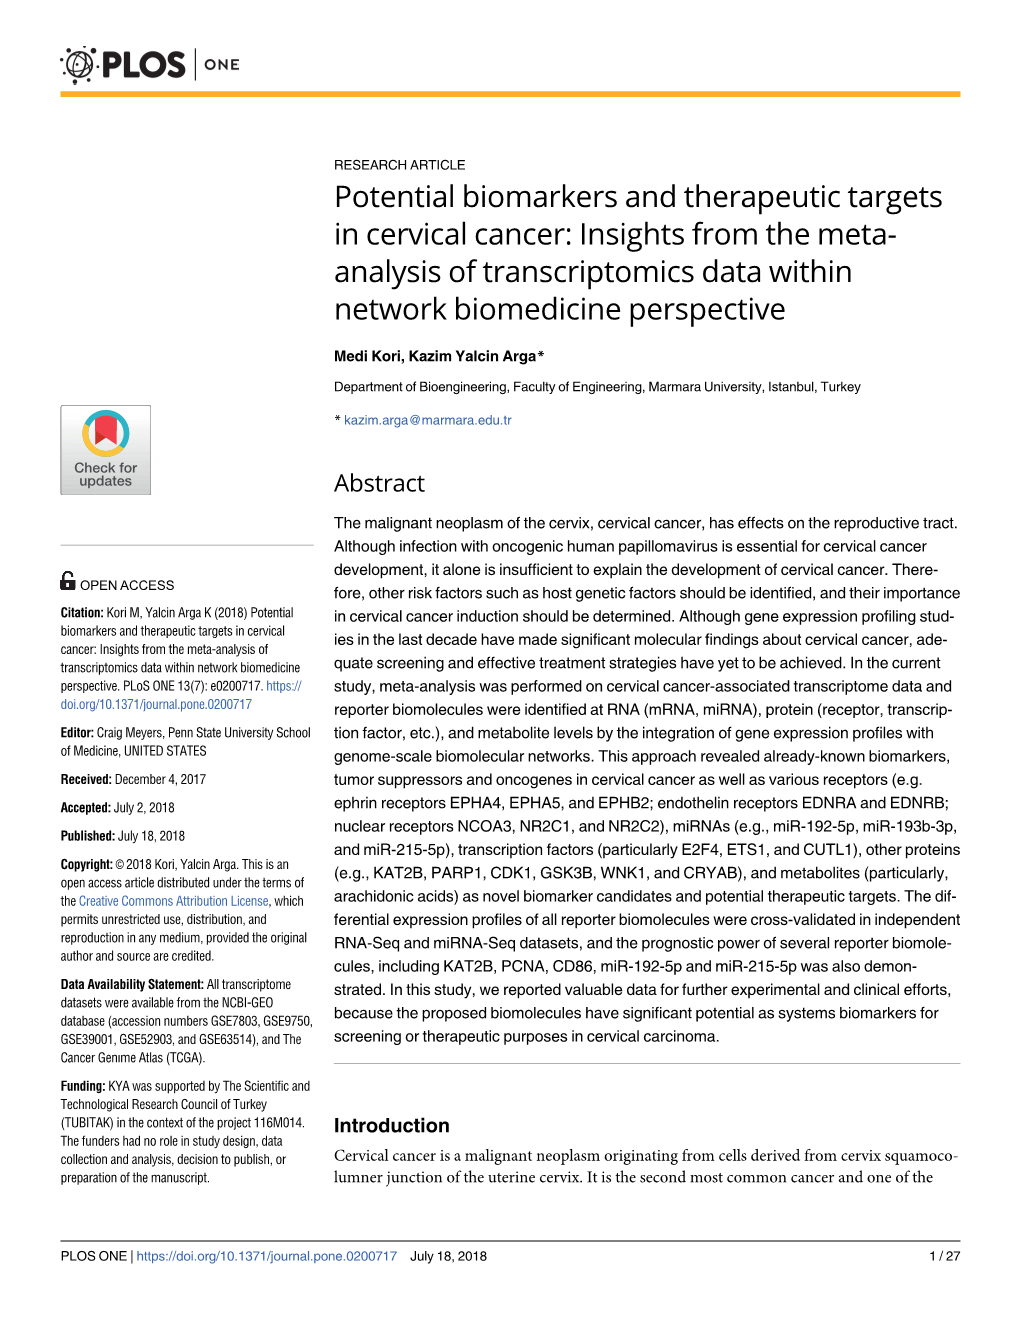 Potential Biomarkers and Therapeutic Targets in Cervical Cancer: Insights from the Meta- Analysis of Transcriptomics Data Within Network Biomedicine Perspective